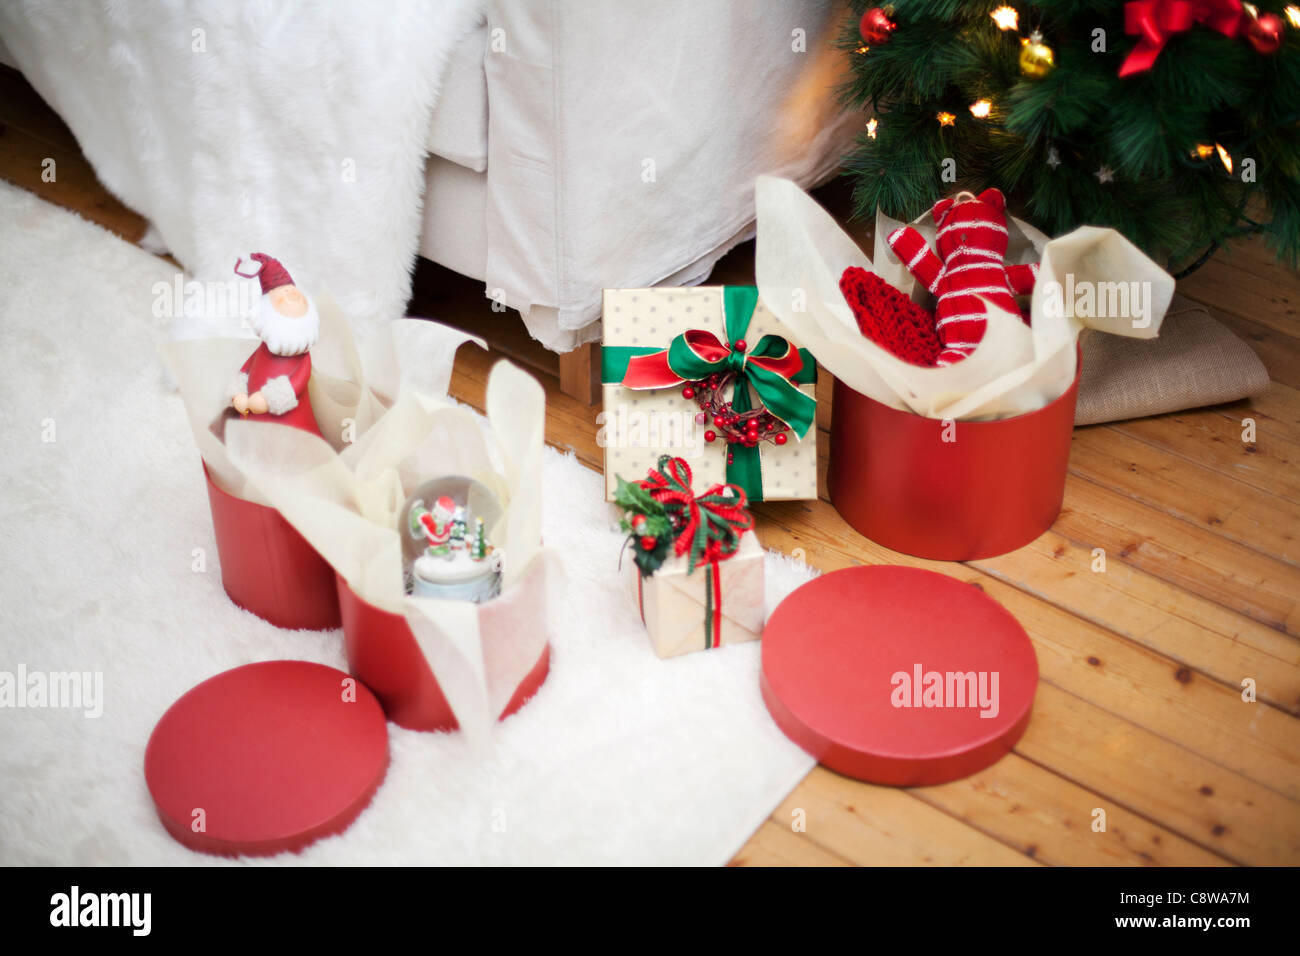 Room Interior With Unwrapped Christmas Gift Boxes And Christmas Tree Stock Photo